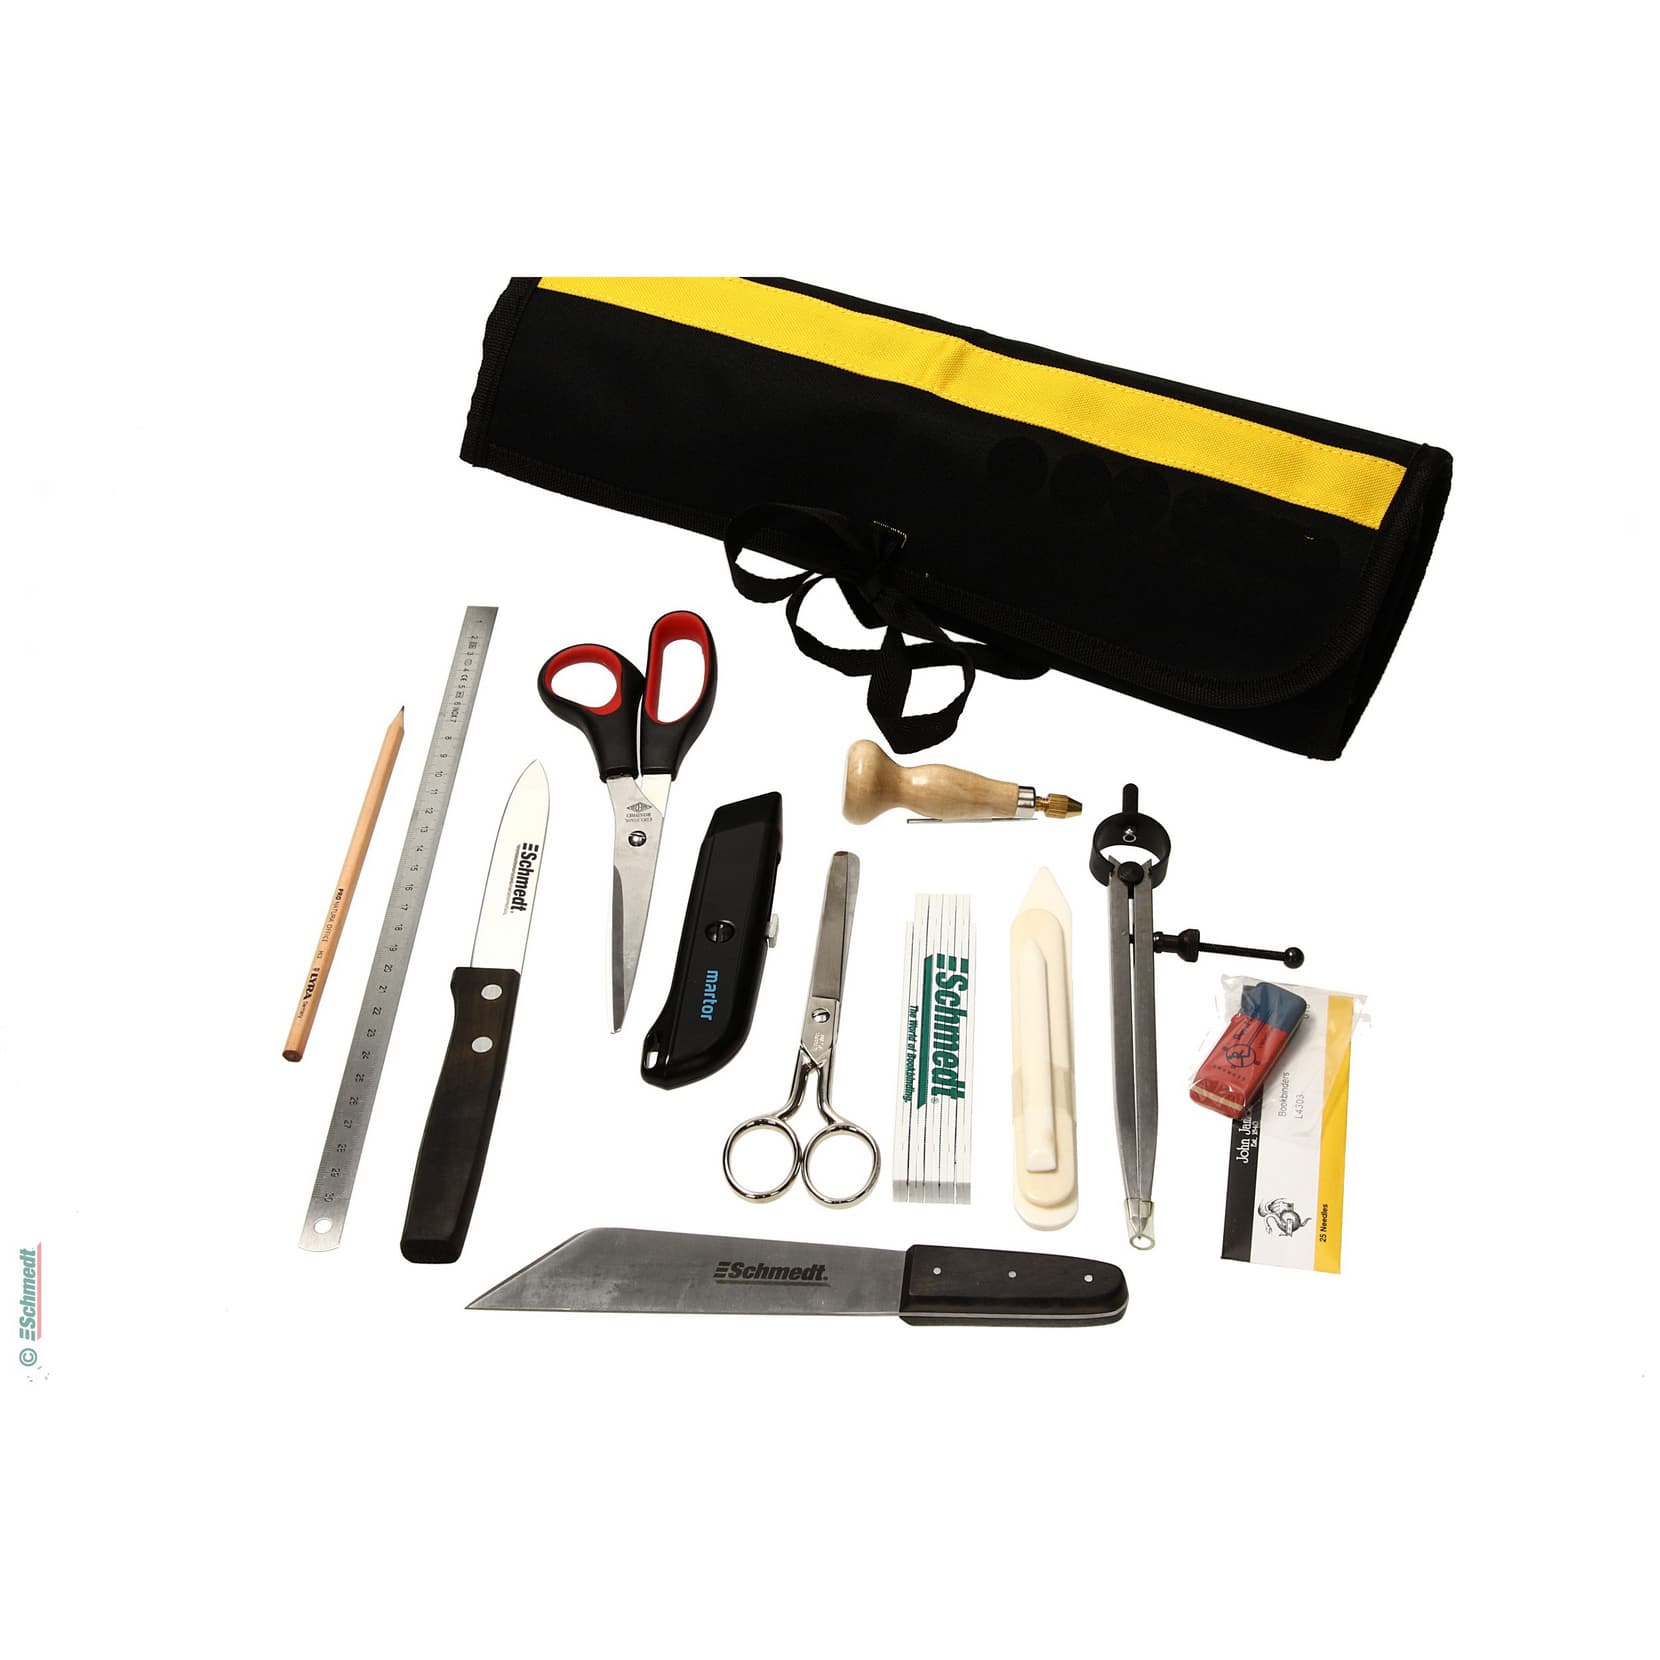 Bookbinding Kit Complete Cased in Hardcover Journal Bookbinding DIY Craft  Kit With Tools, Supplies and Instruction Book 